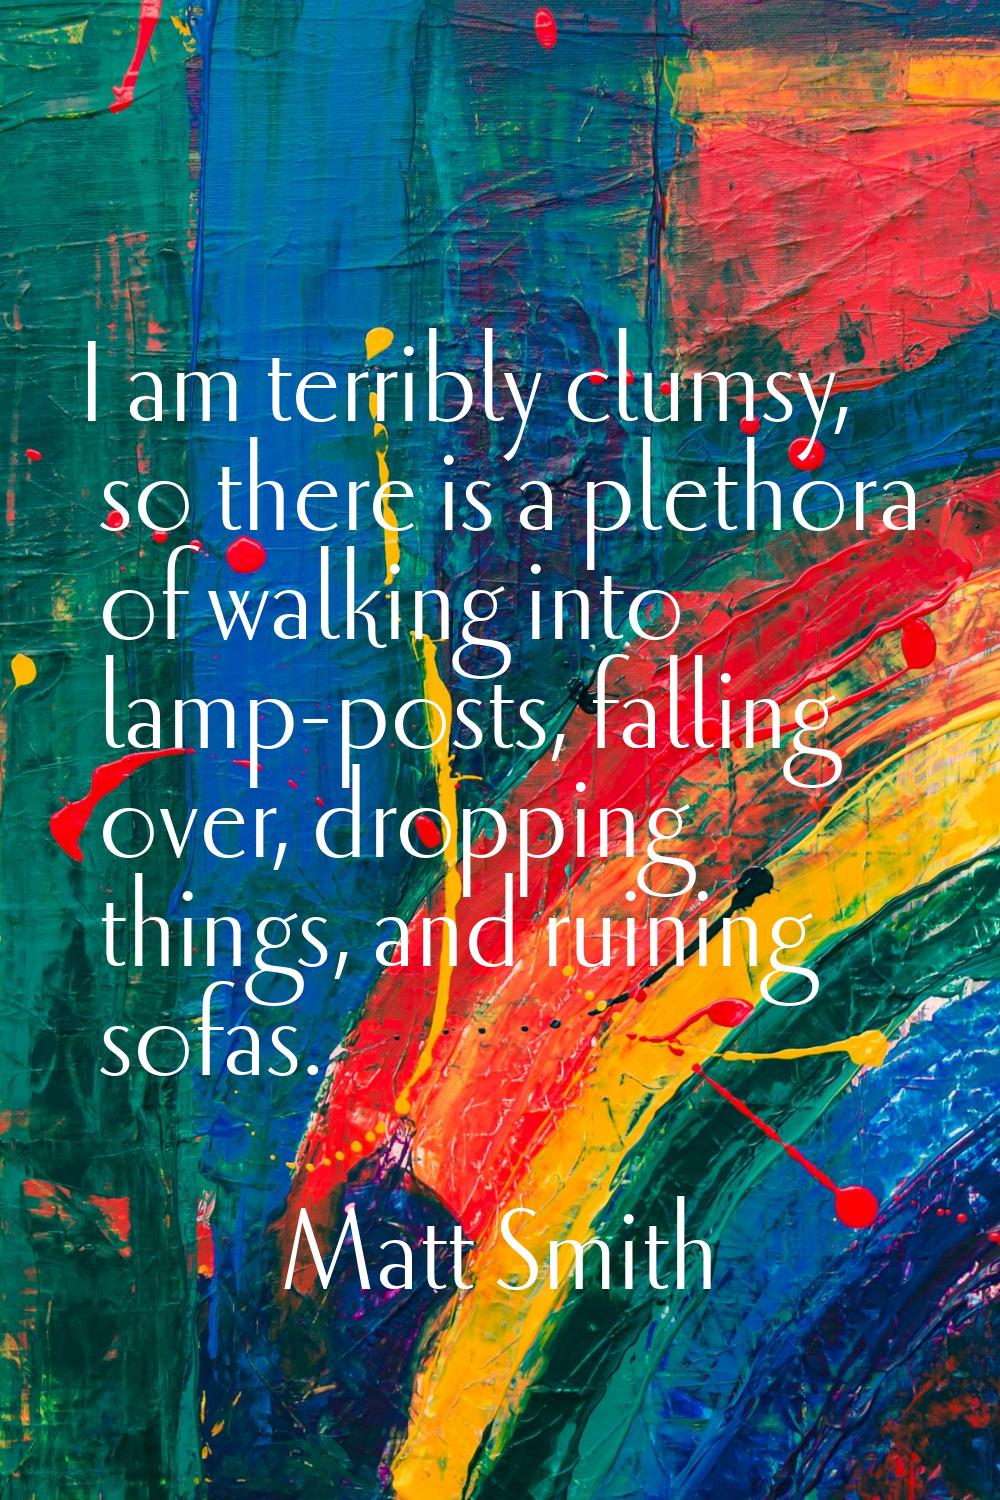 I am terribly clumsy, so there is a plethora of walking into lamp-posts, falling over, dropping thi